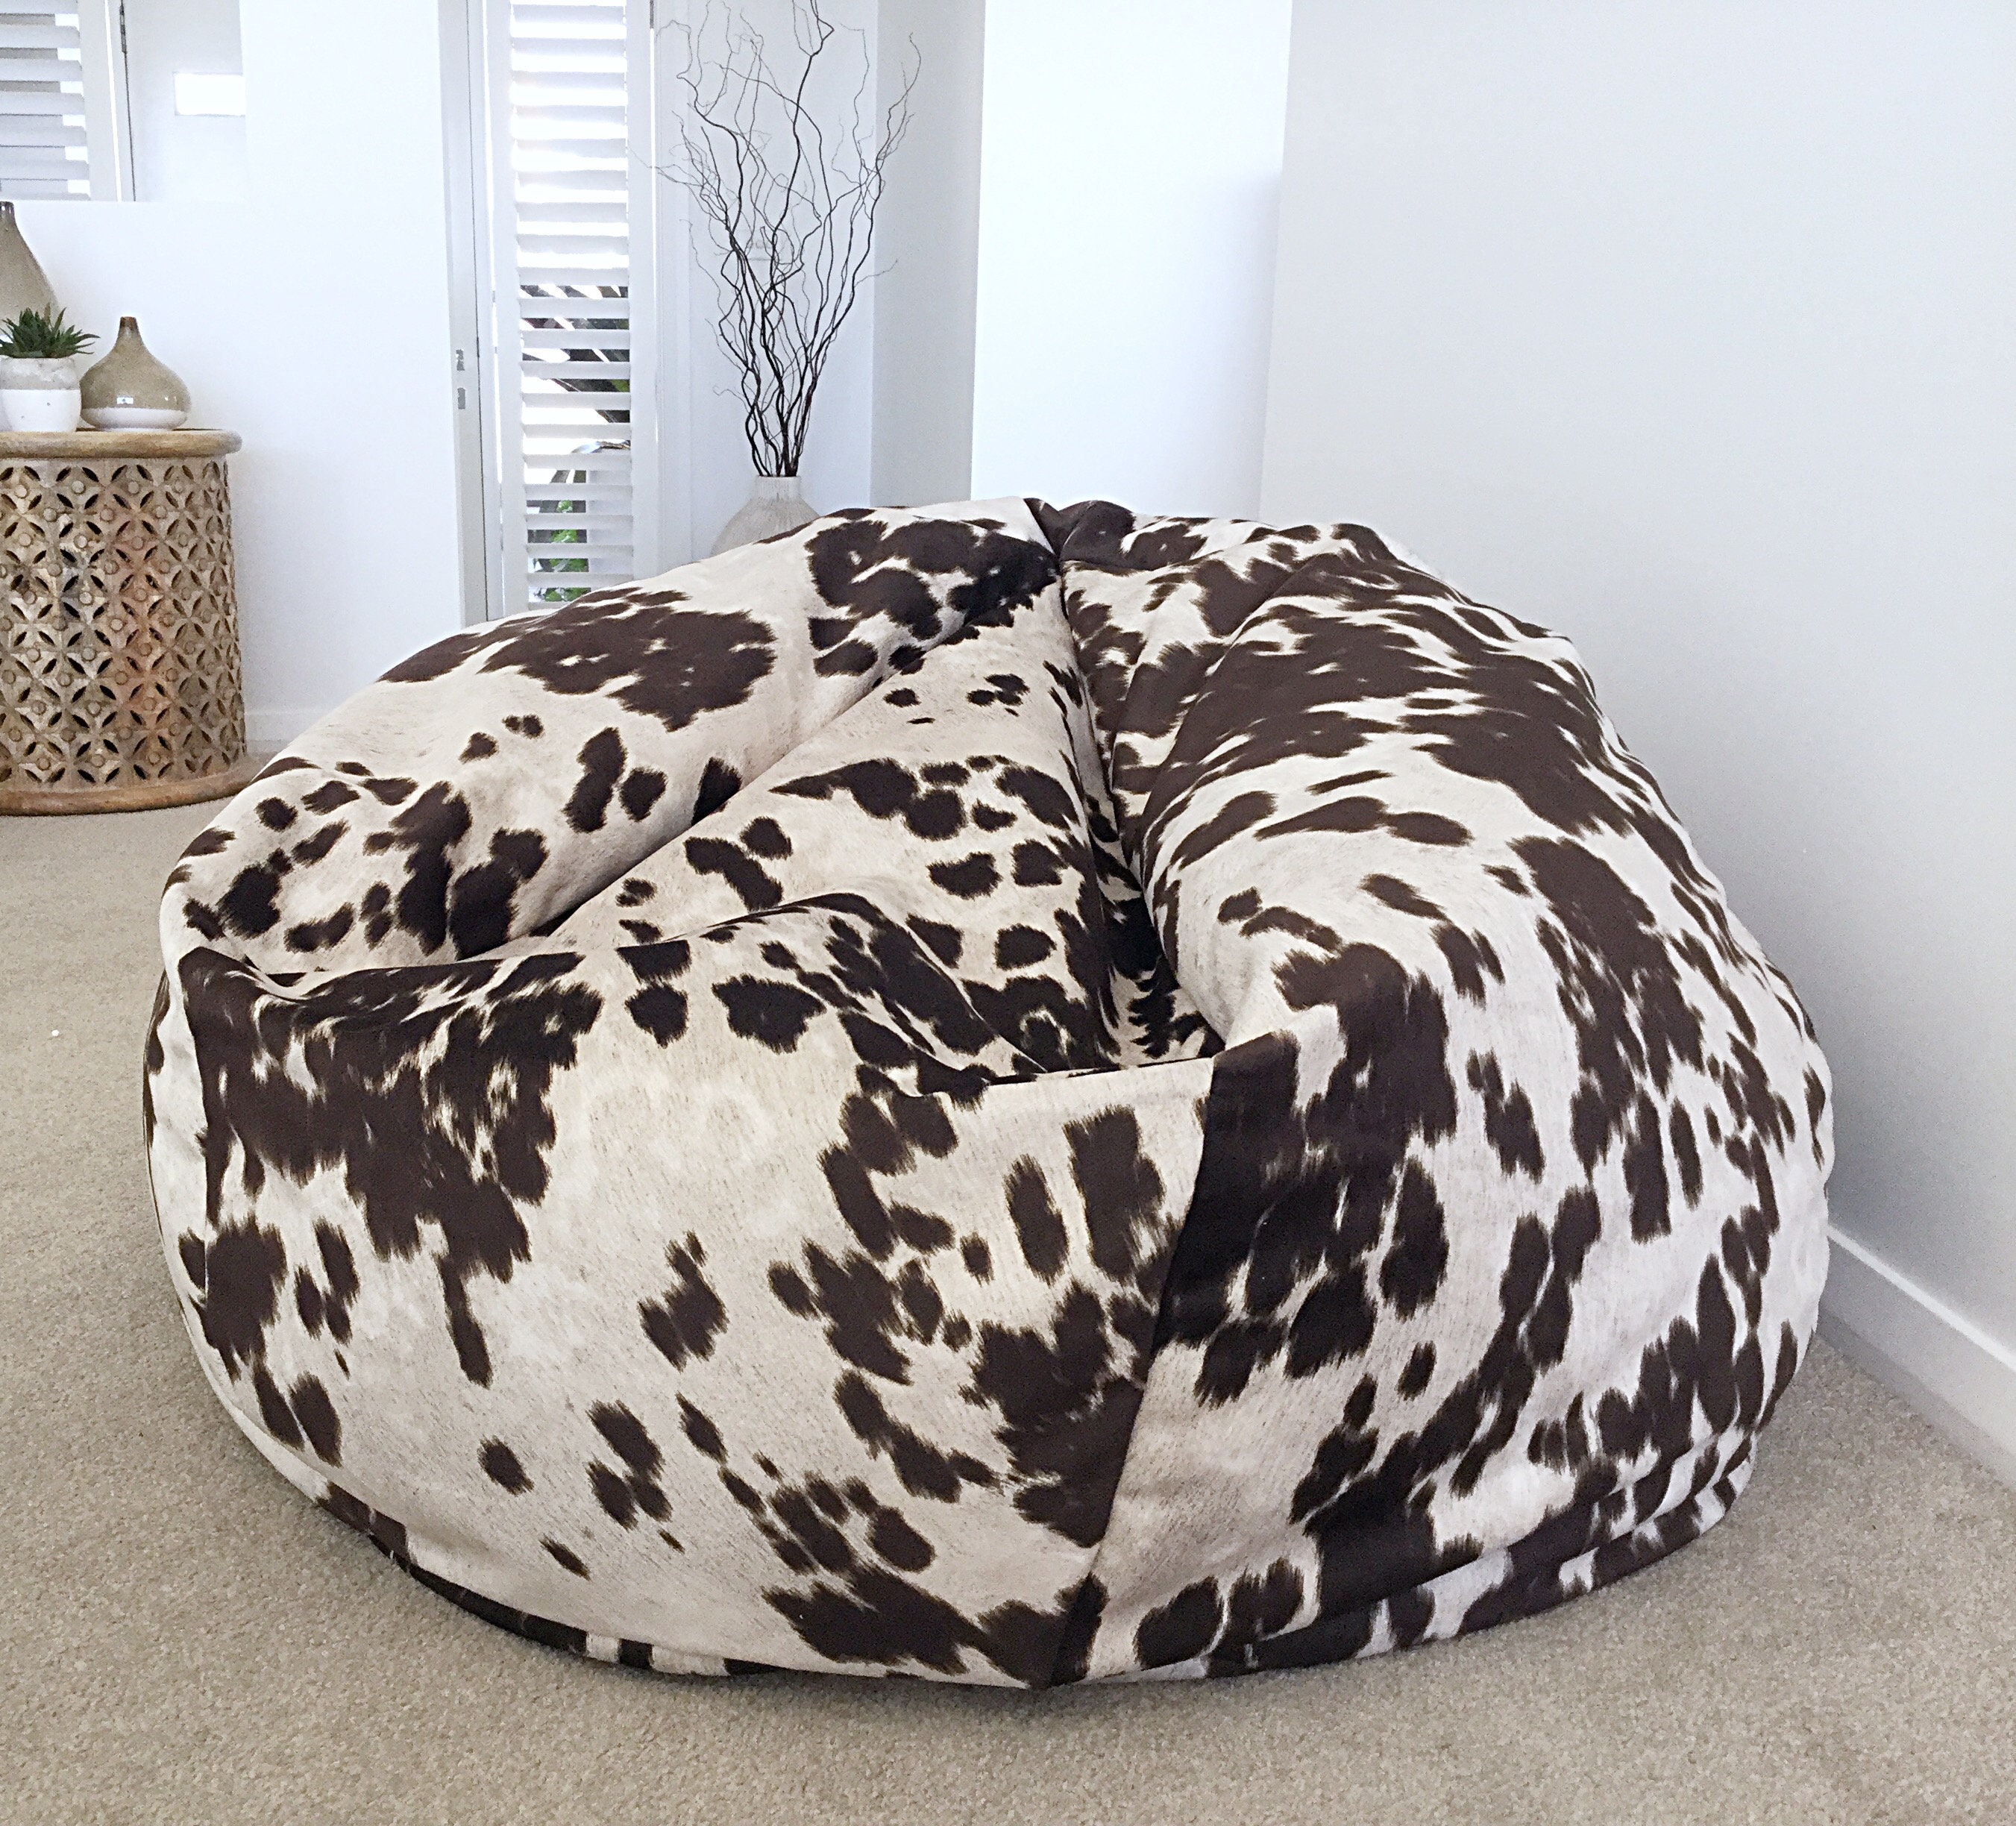 Genuine Cowhide Leather Recliner Beanbag Chairs Tan - Only Beanbag